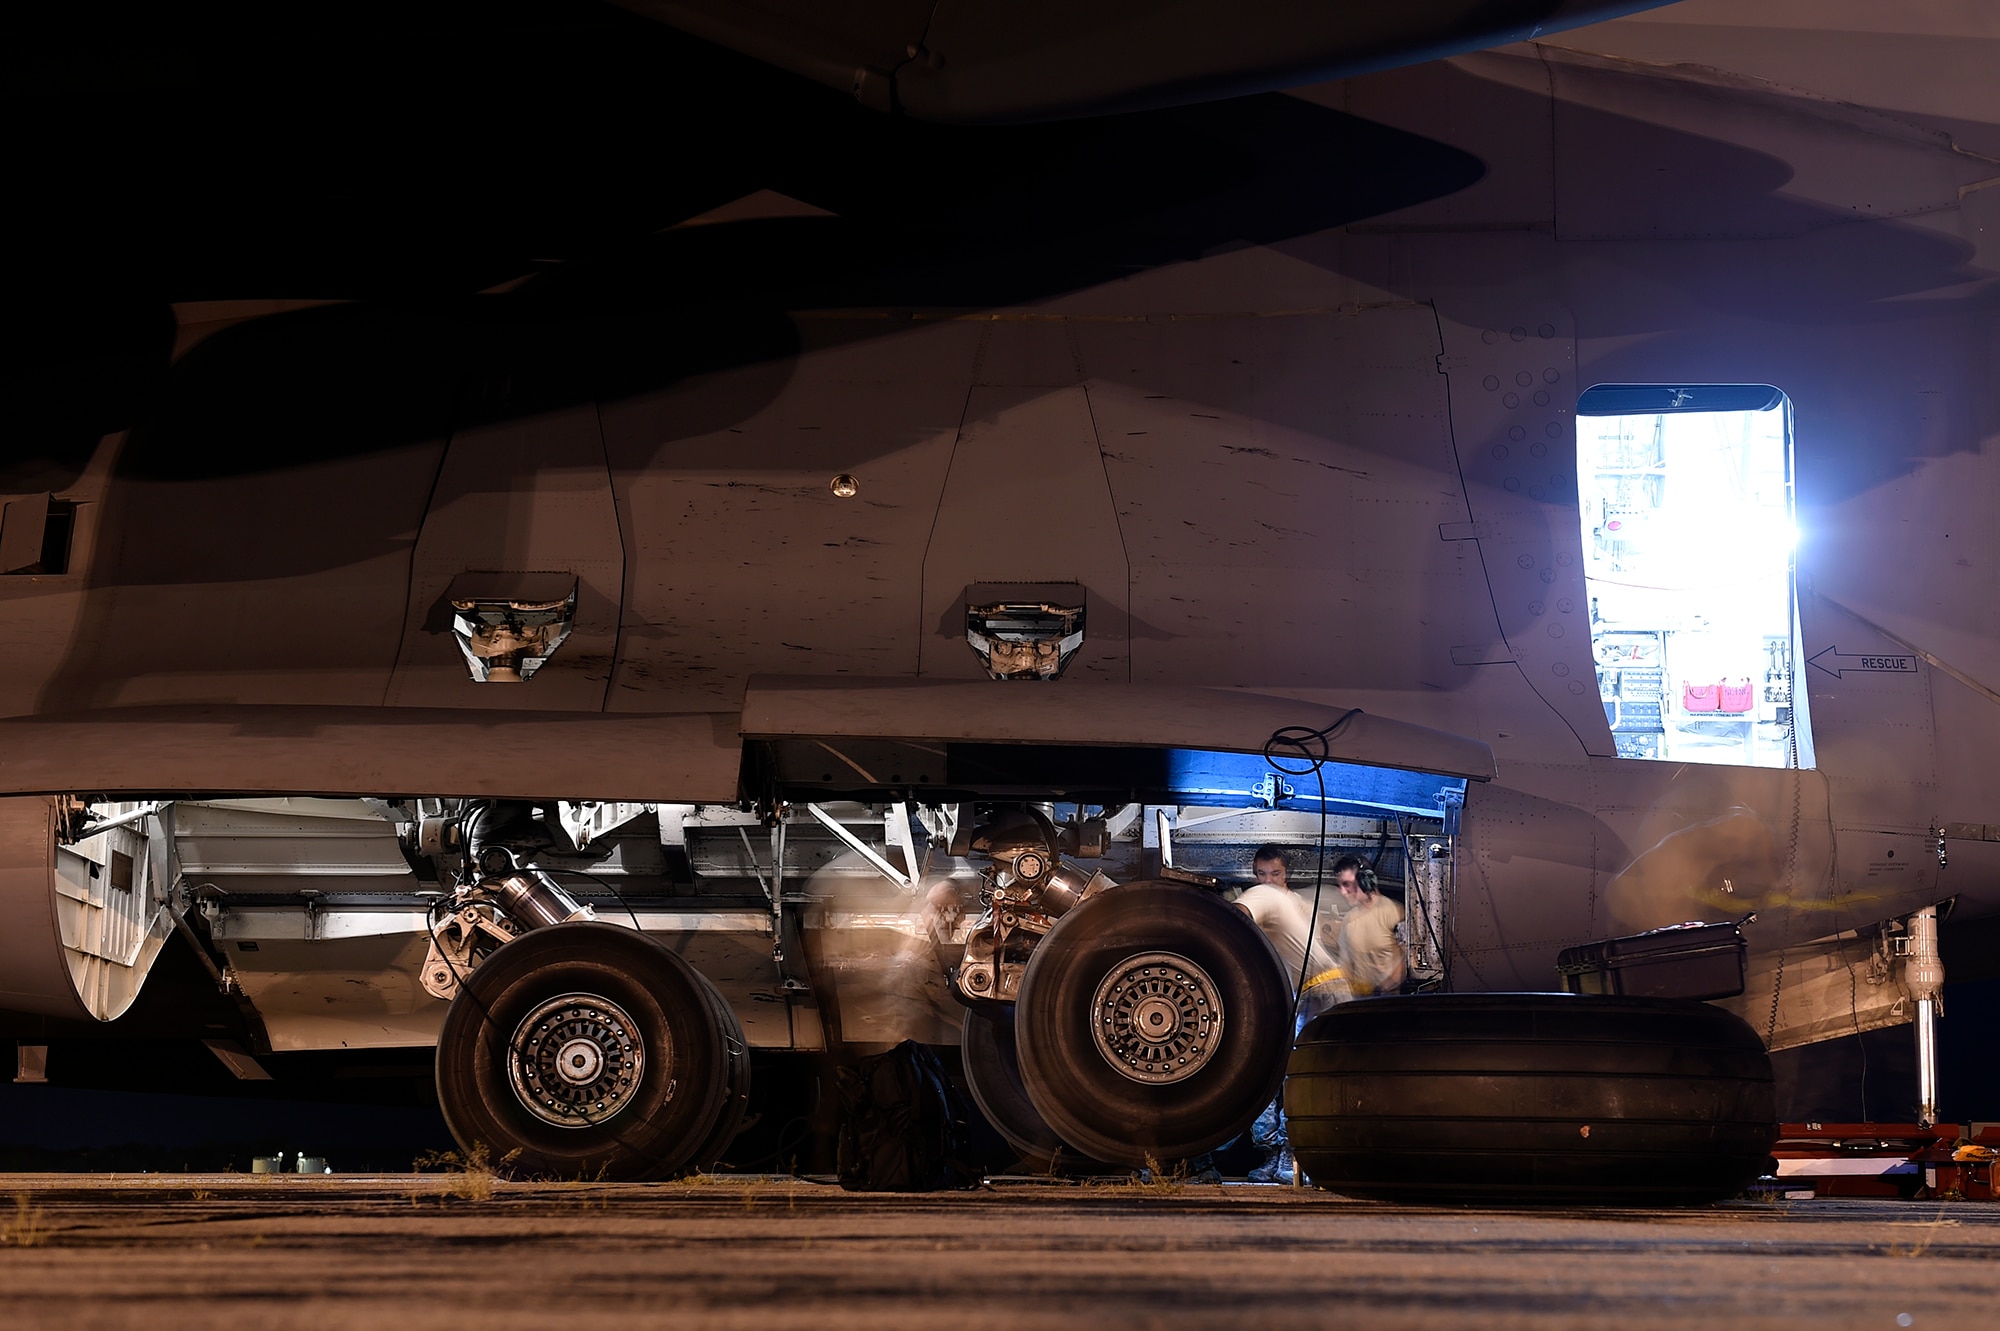 Airmen assigned to the 437th Aircraft Maintenance Squadron change a tire on a C-17 Globemaster III Sept. 13, 2018, at Scott Air Force Base, Ill. 437 AMXS maintainers serviced more than 10 aircraft that were evacuated from Joint Base Charleston, S.C., to Scott AFB ahead of Hurricane Florence. In all, more than 20 C-17s and supporting personnel were evacuated to designated safe locations, enabling them to continue their global airlift operations.